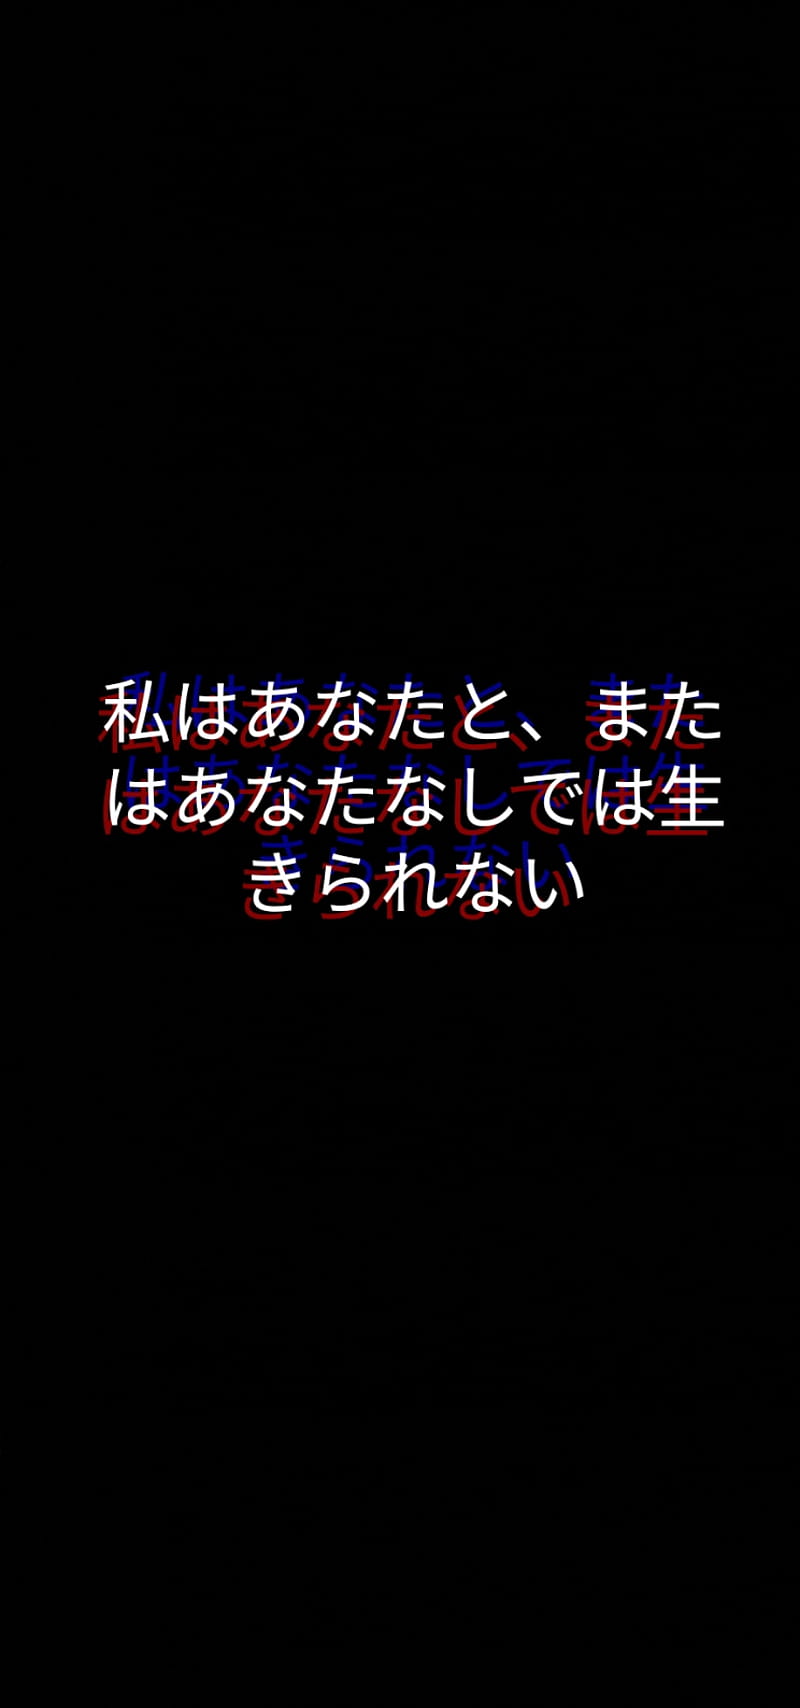 Sad Tokyoghoul Quote Glitch Japanese Live Quote Sad Hd Phone Wallpaper Peakpx